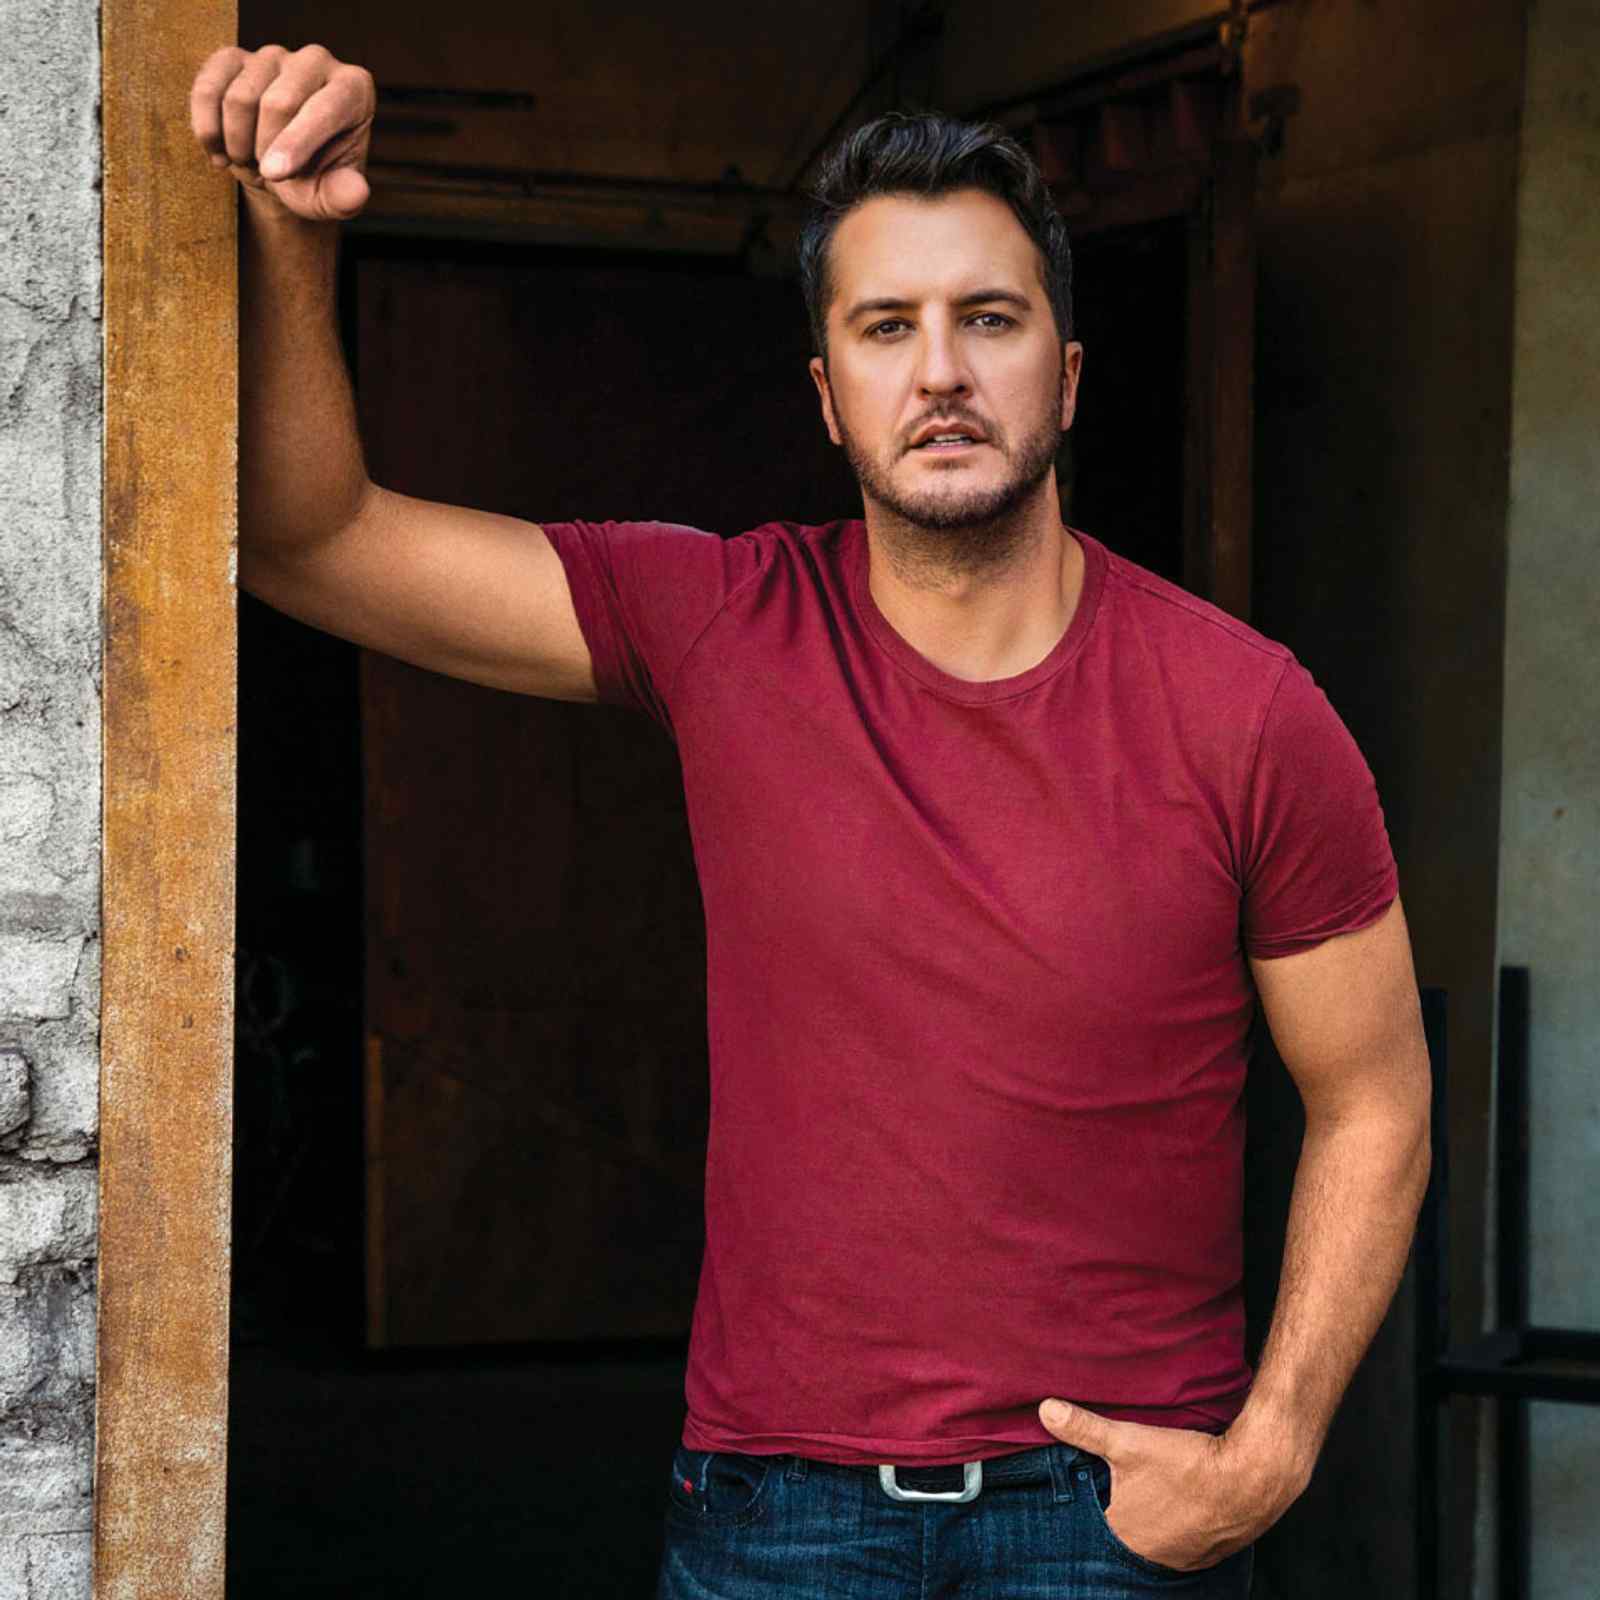 Luke Bryan Exclusively Premiered “Down To One” Music Video on Facebook Today!